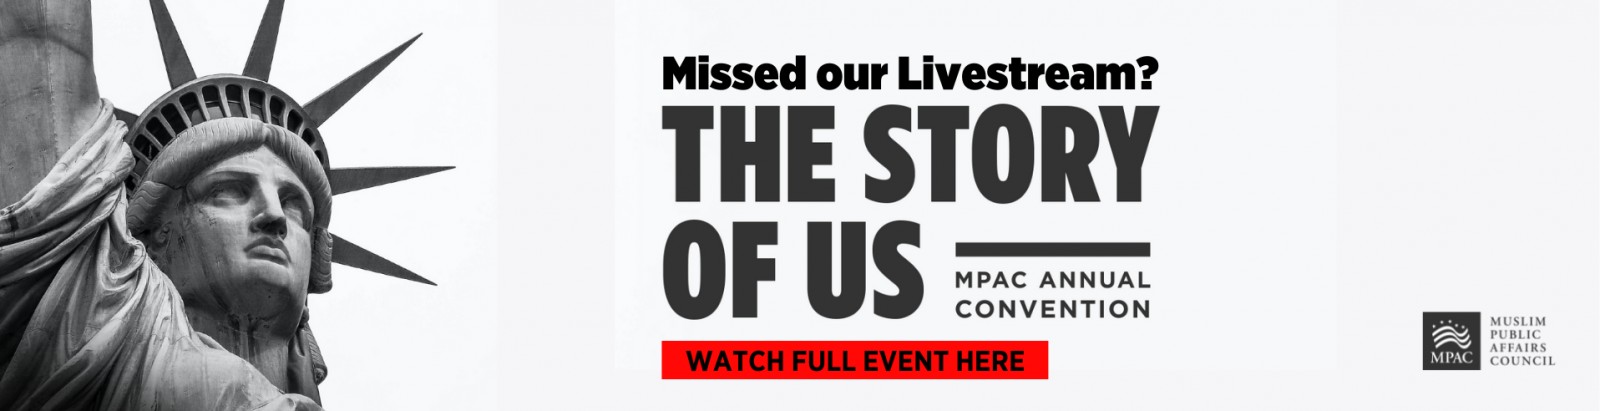 Missed 'The Story of US Livestream?' Watch The Full Event Here